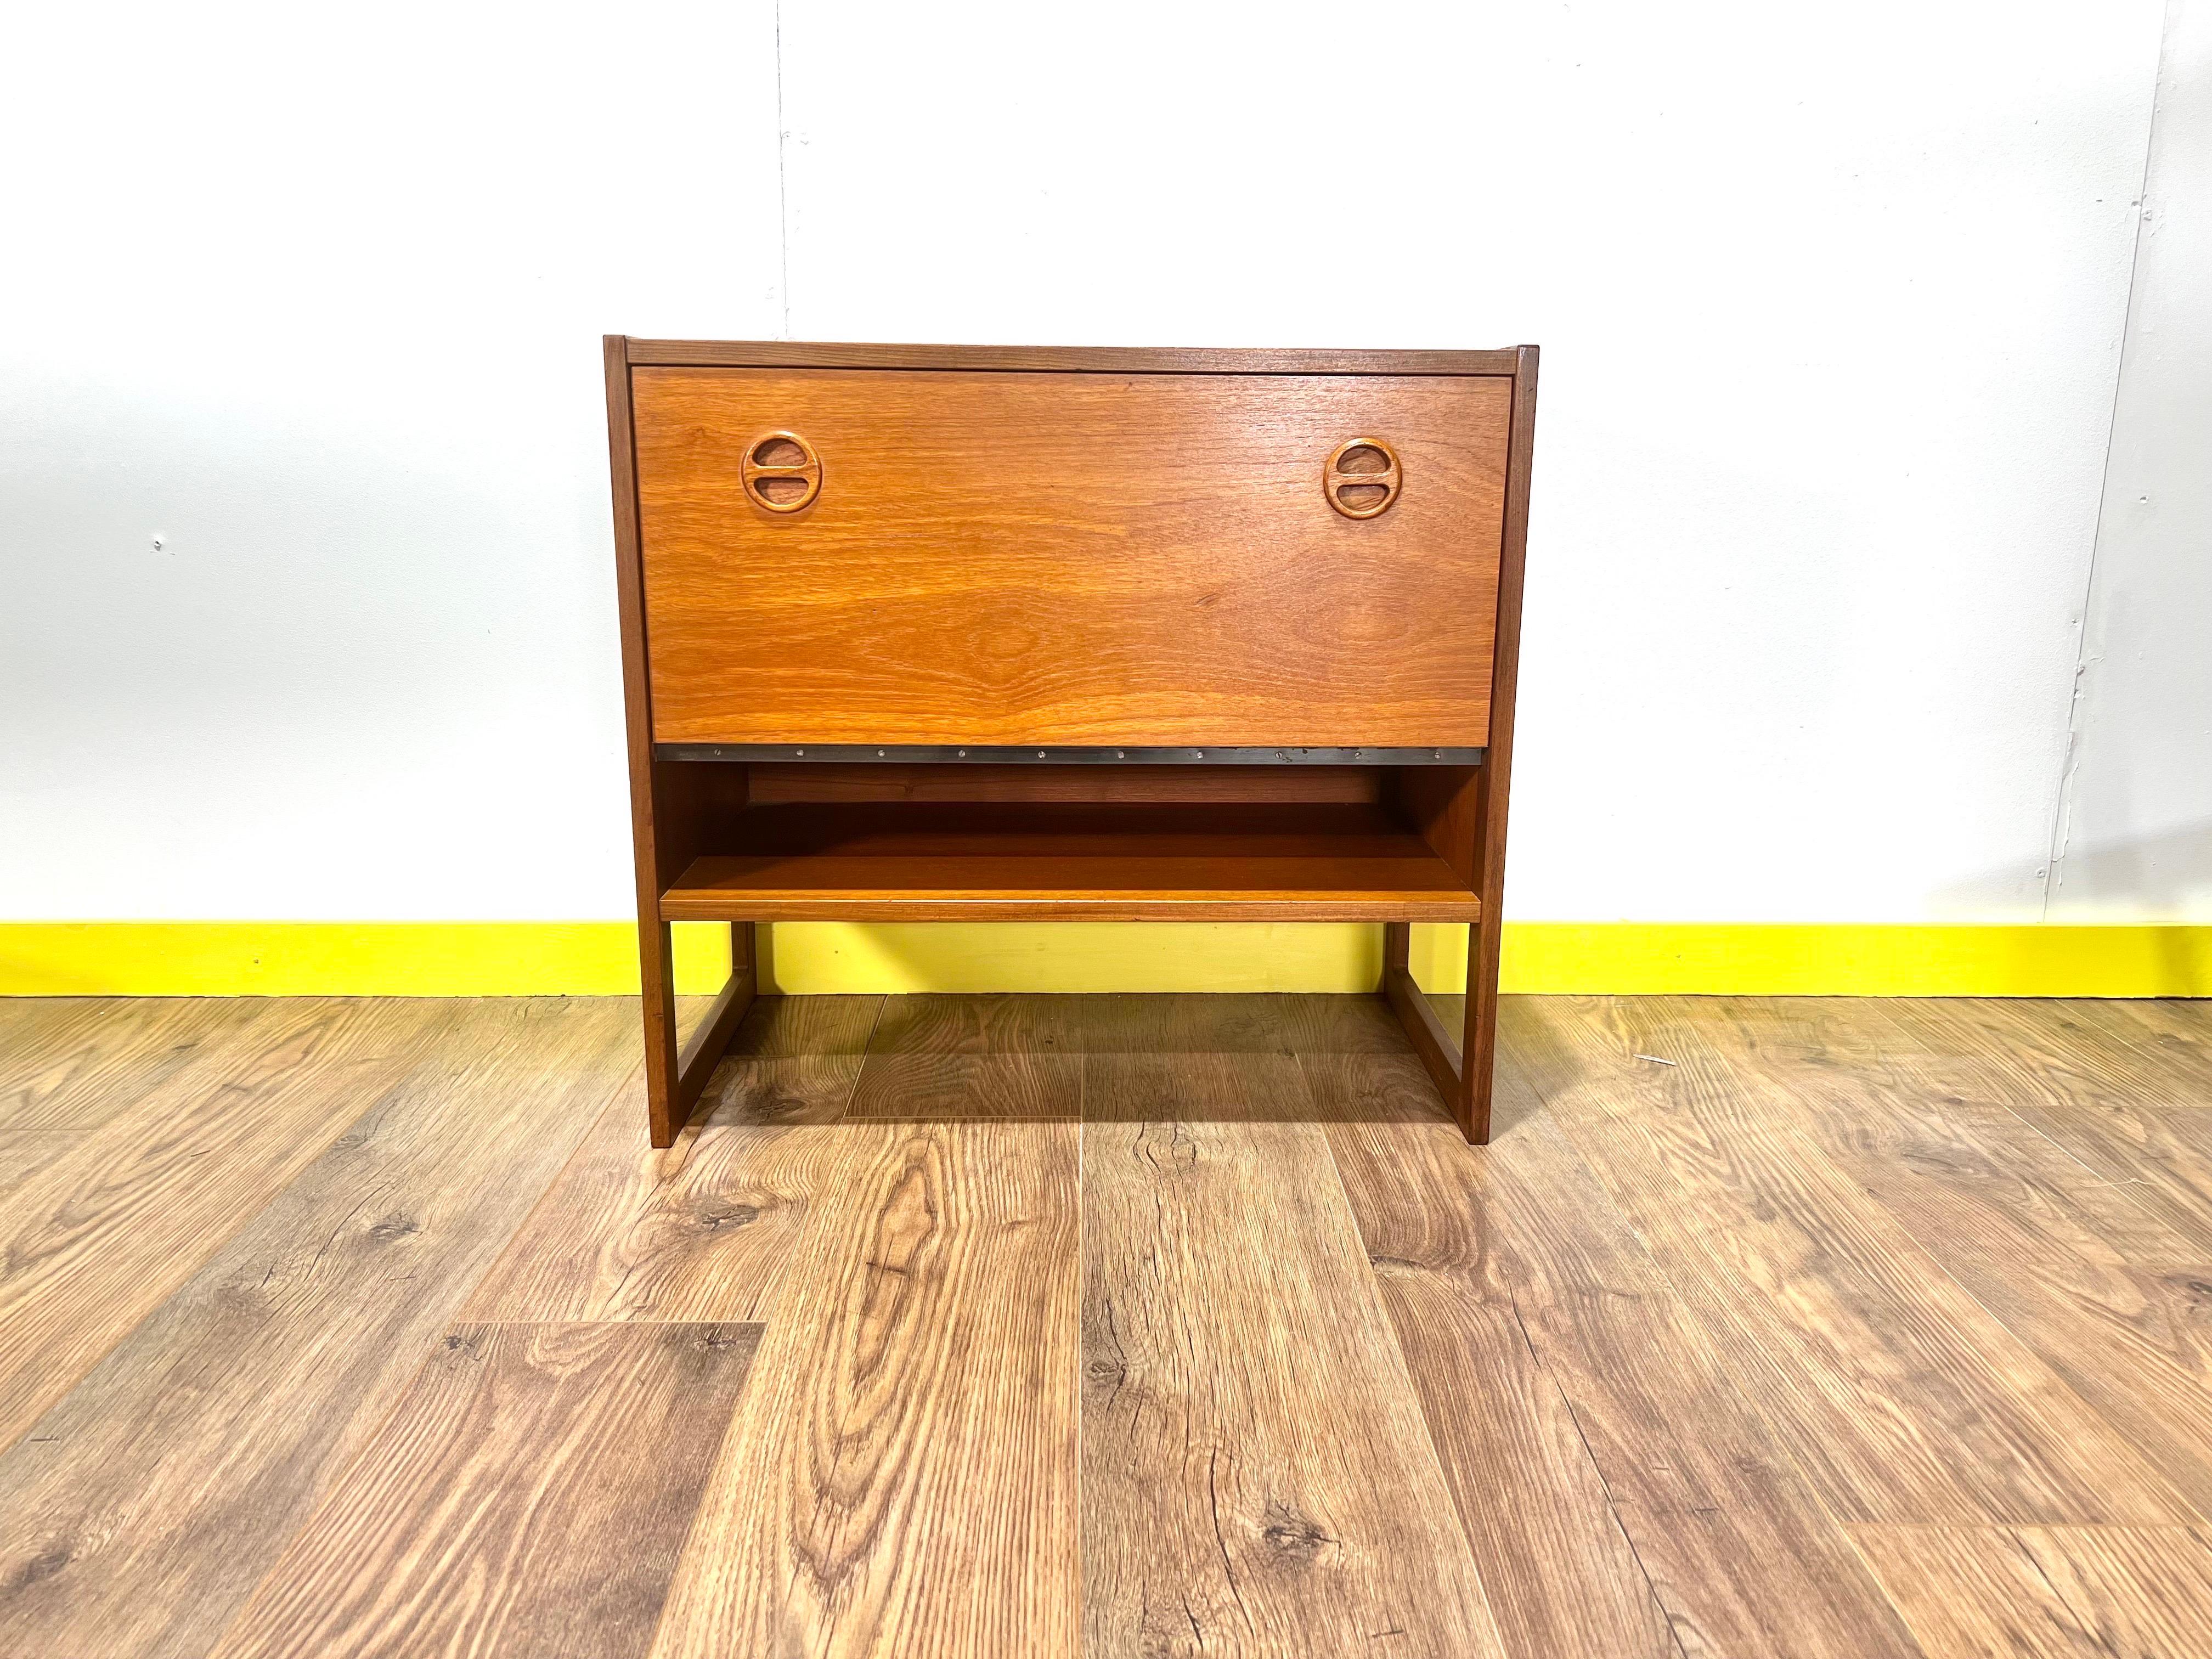 Mid century modern teak record cabinet. This gorgeous little cabinet can be used for a variety of purposes. The pull door with its frog eye handles reveals dividers for records/books and a handy space for storage.

It would look great in any spae